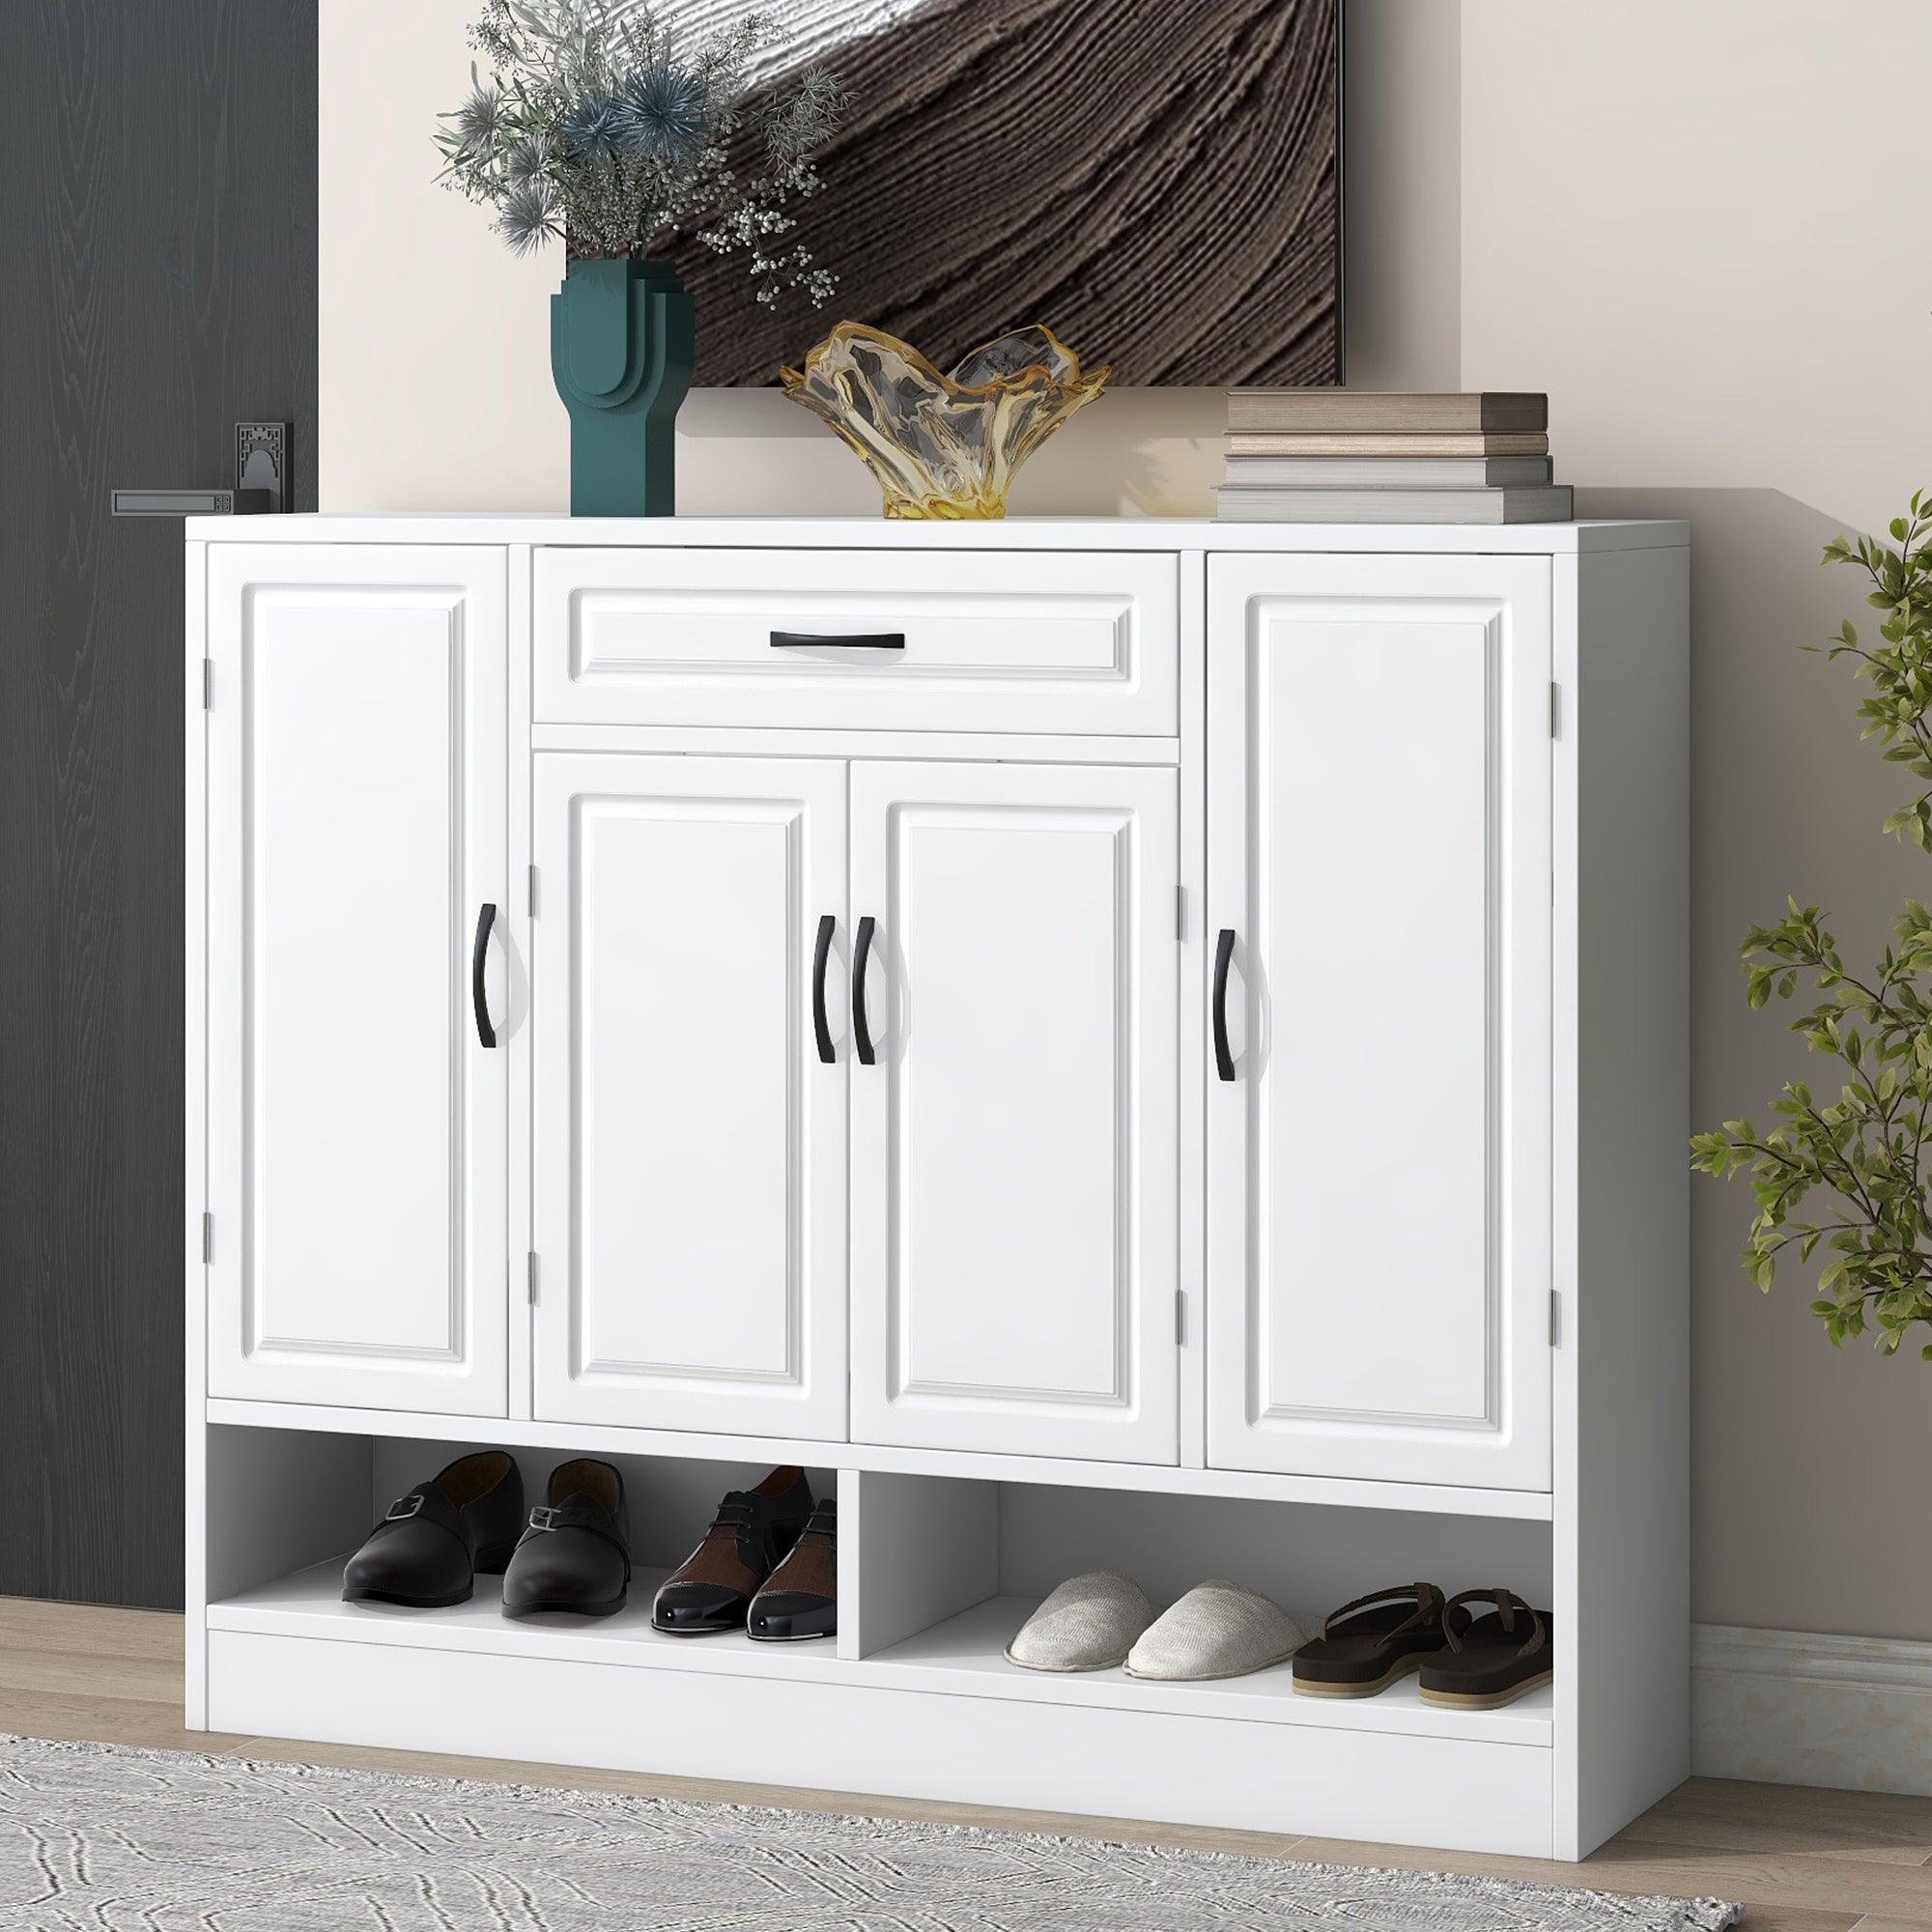 🆓🚛 Sleek & Modern Shoe Cabinet With Adjustable Shelves, Minimalist Shoe Storage Organizer With Sturdy Top Surface, Space-Saving Design Side Board for Various Sizes Of Items, White